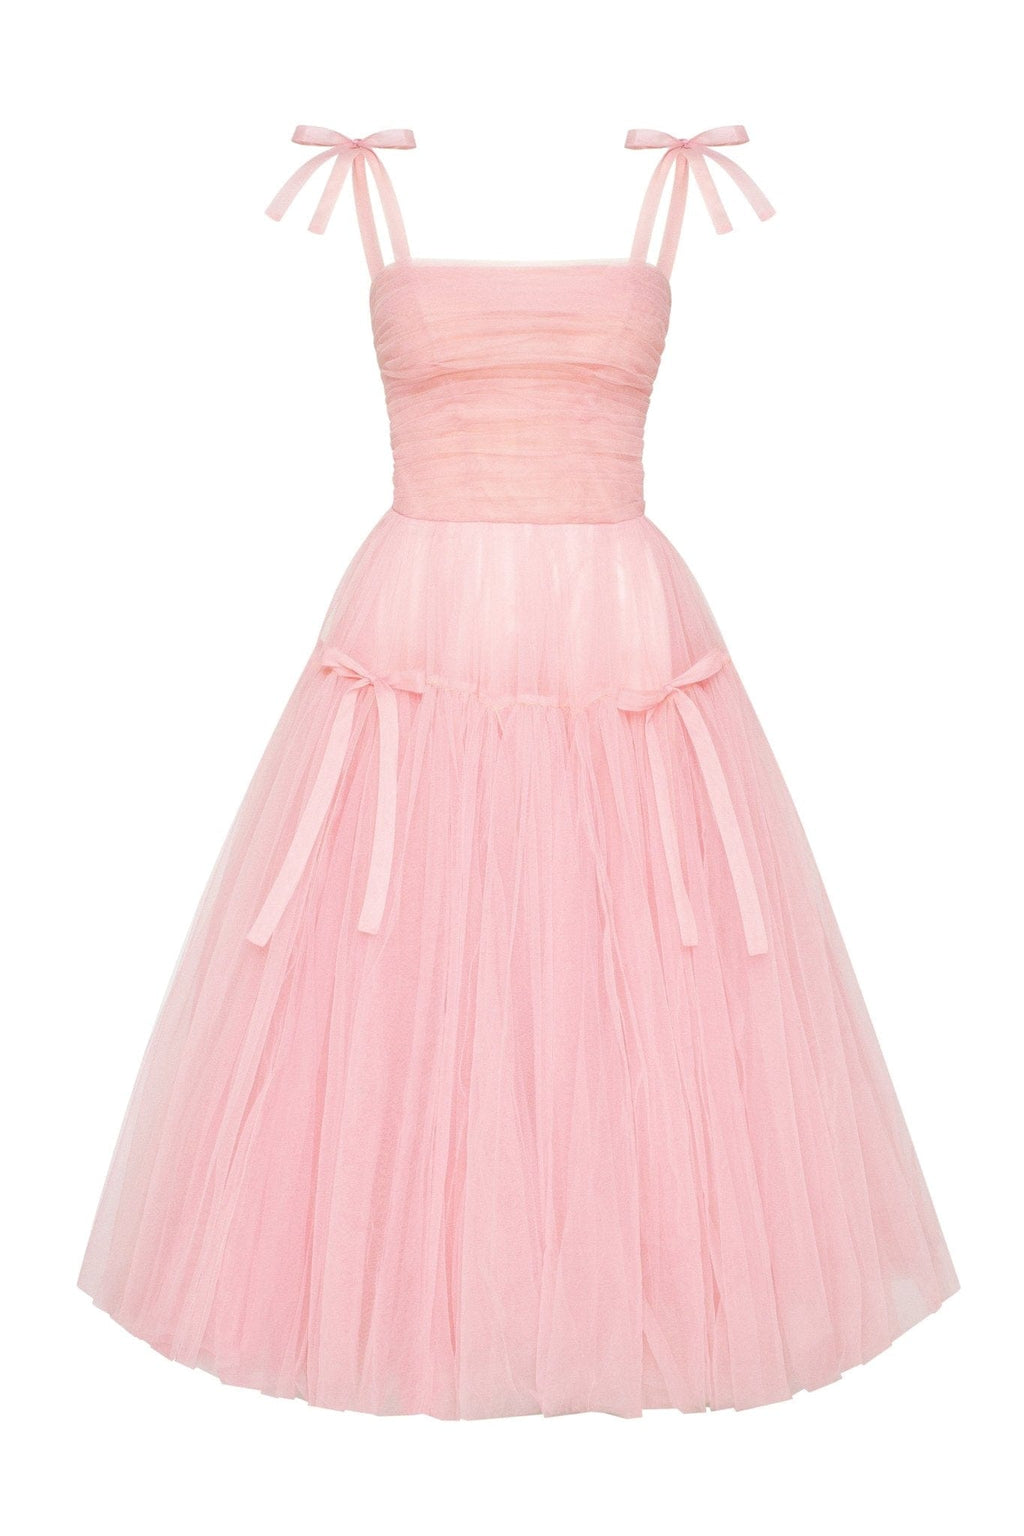 Misty Rose Ruffled Tulle Midi Dress ➤➤ Milla Dresses - USA, Worldwide  delivery